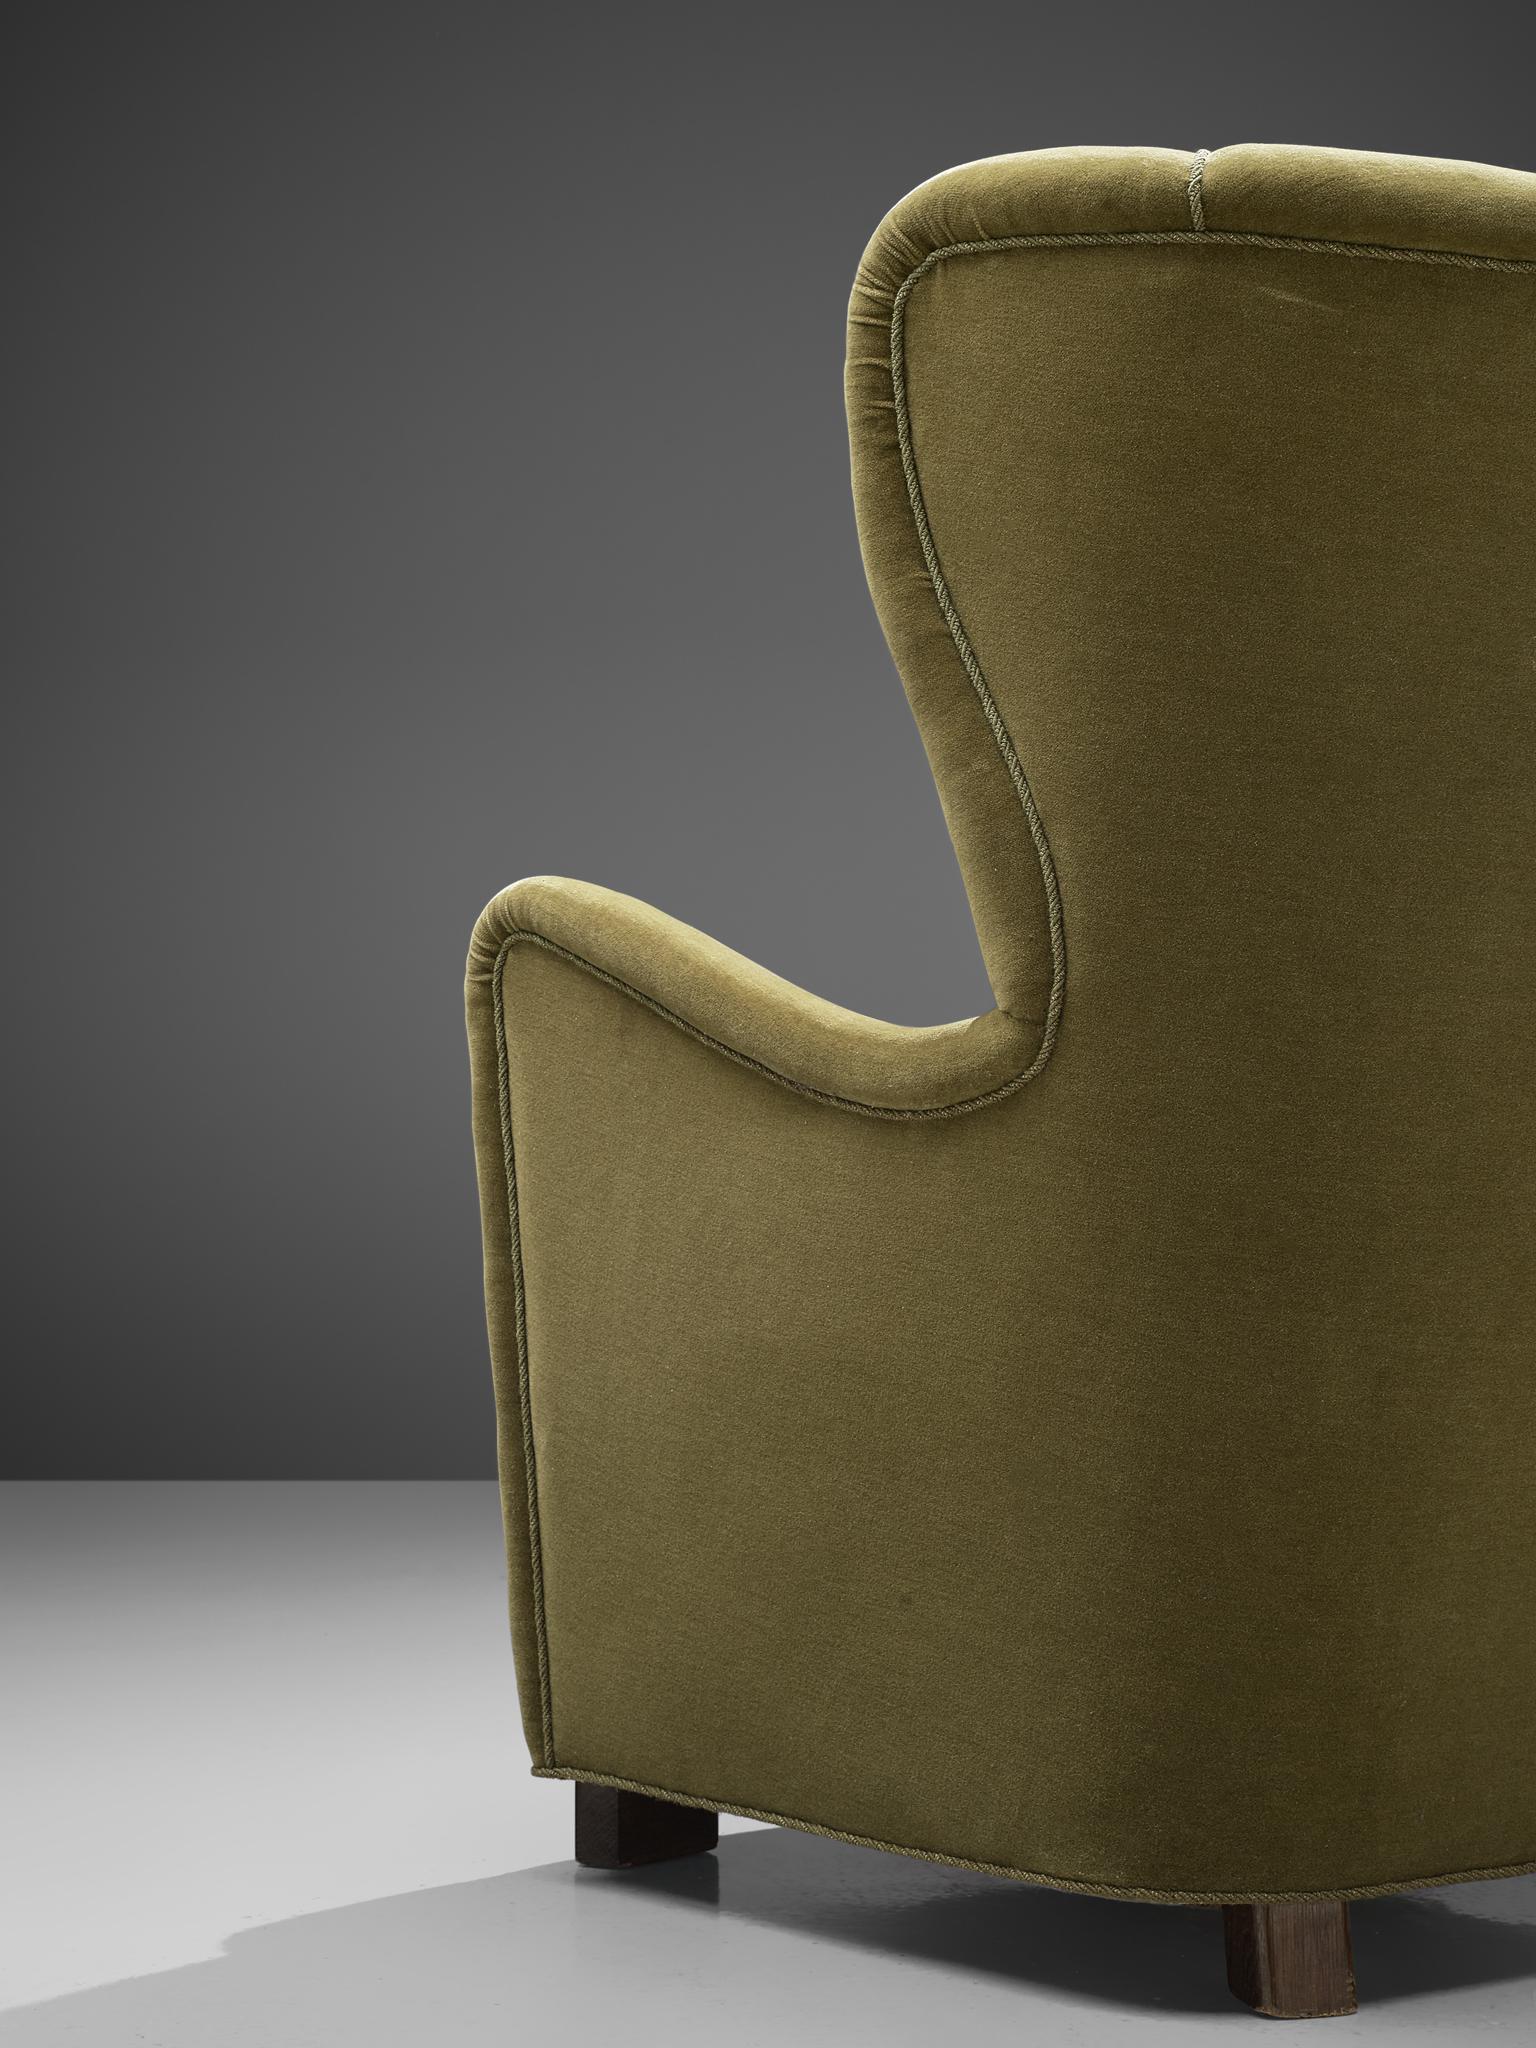 Mid-20th Century Danish Cabinetmaker's Lounge Chair in Green Upholstery